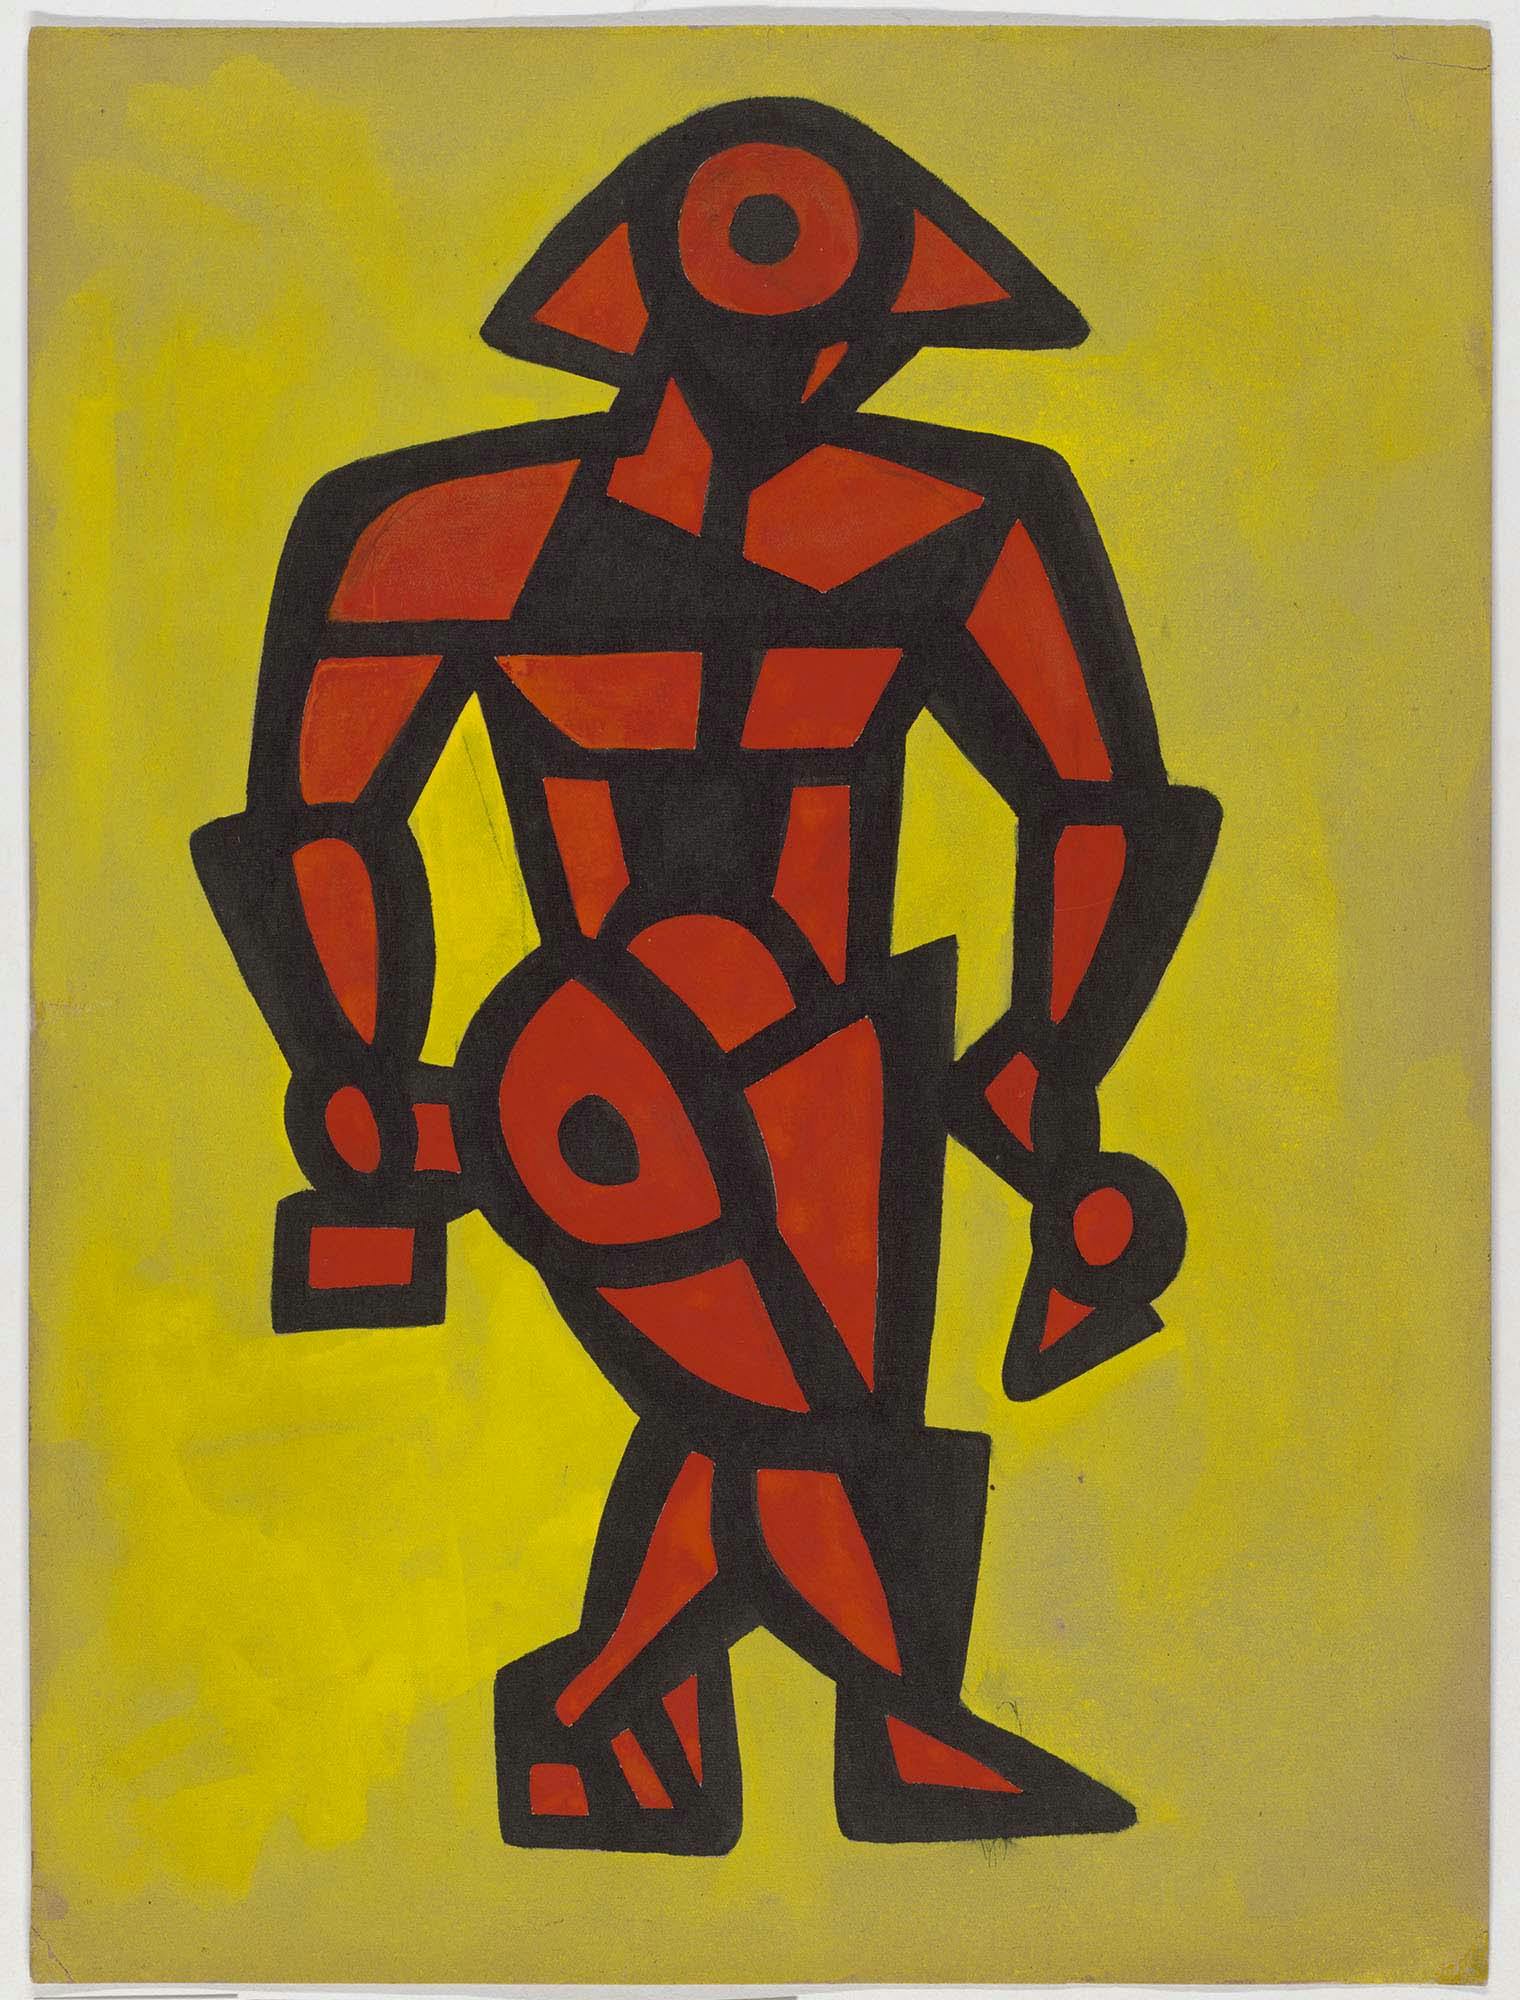 The Walking Man
c. 1930s
Gouache ink, and graphite on paper
15 7/8 x 11 7/8 in. (40.3 x 30.2 cm)
 – The Richard Pousette-Dart Foundation